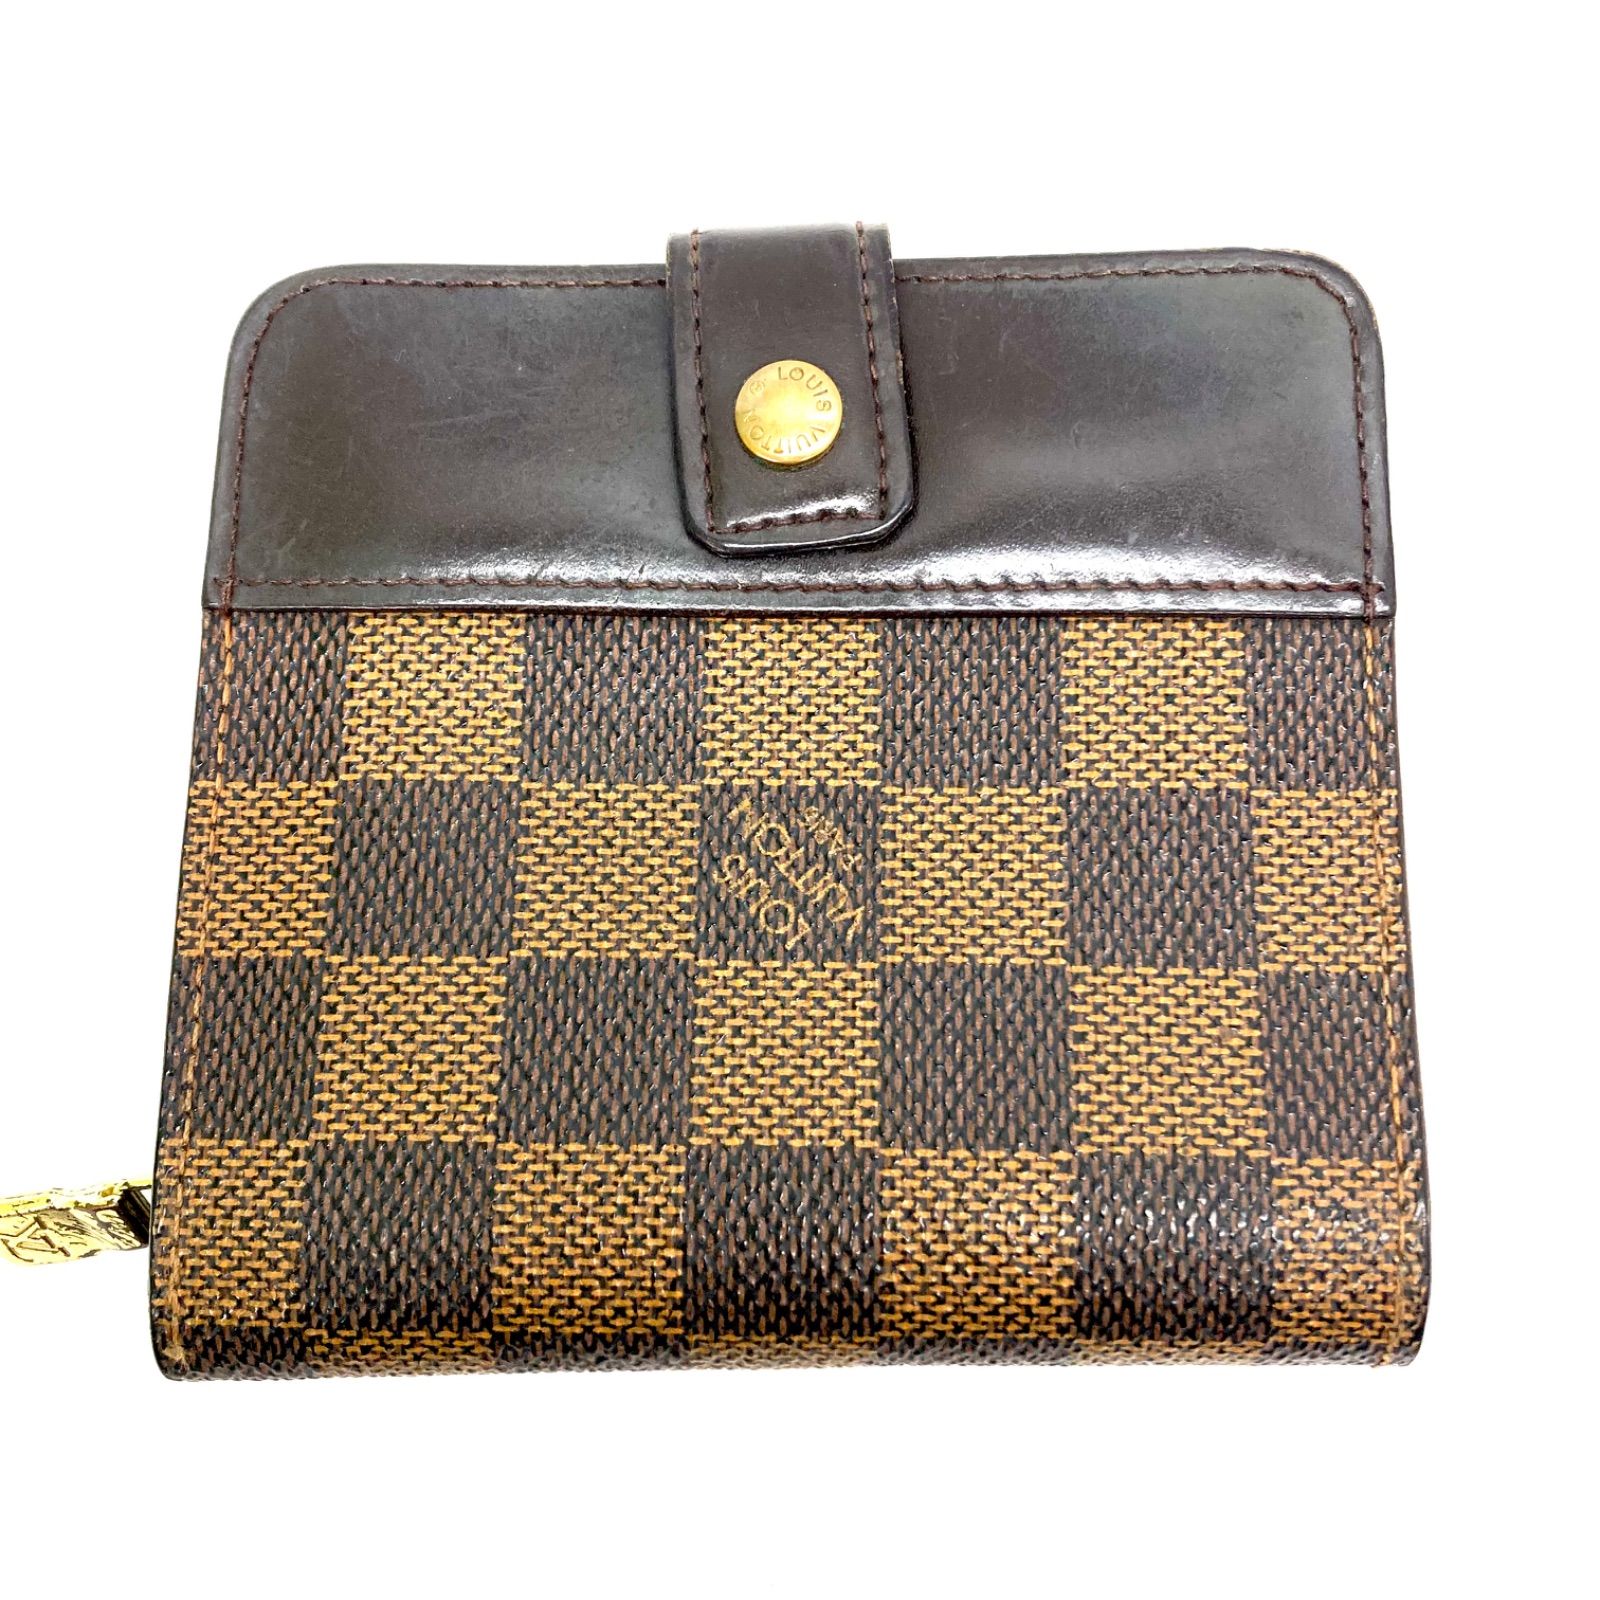 ◇LOUIS VUITTON◇ルイヴィトン ダミエ 折り財布 コンパクトジップ